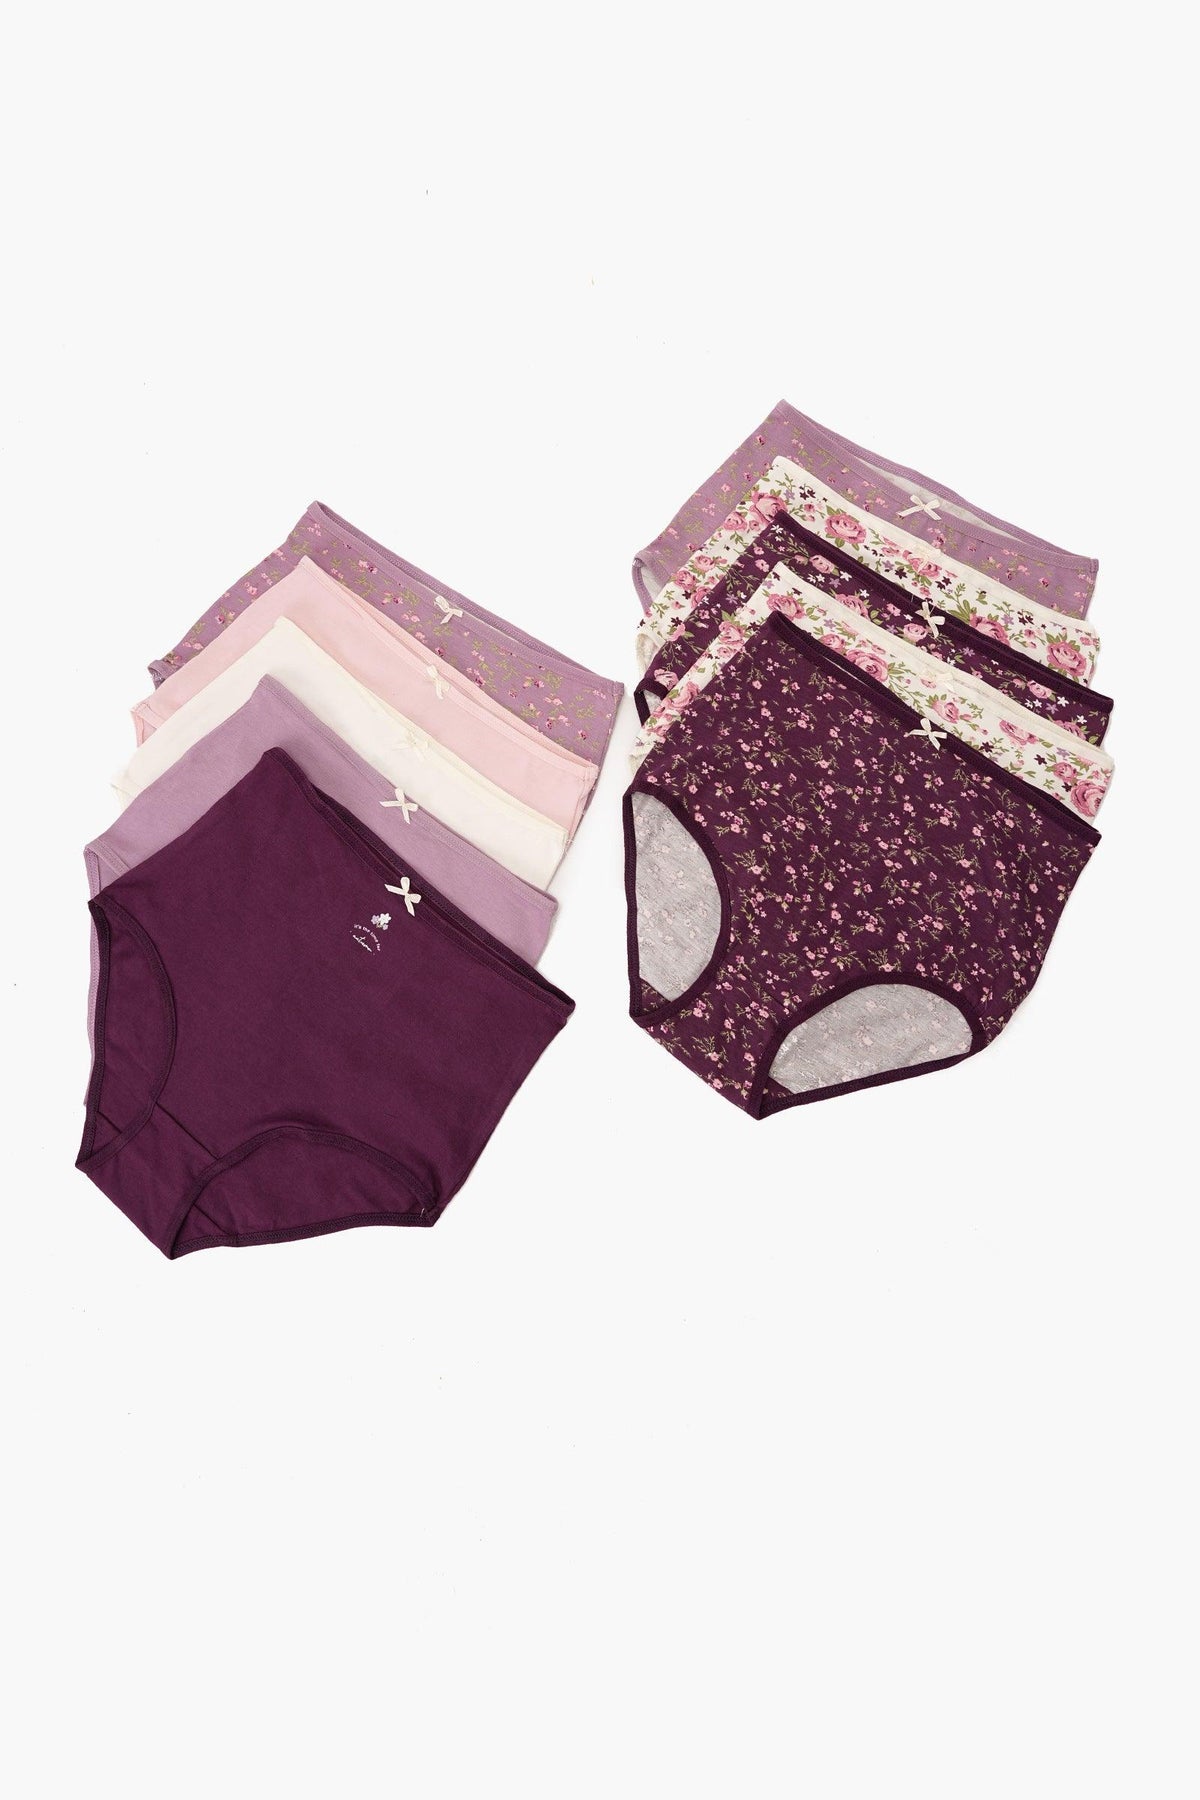 Pack of 10 Colored Full Brief Panties - Carina - كارينا